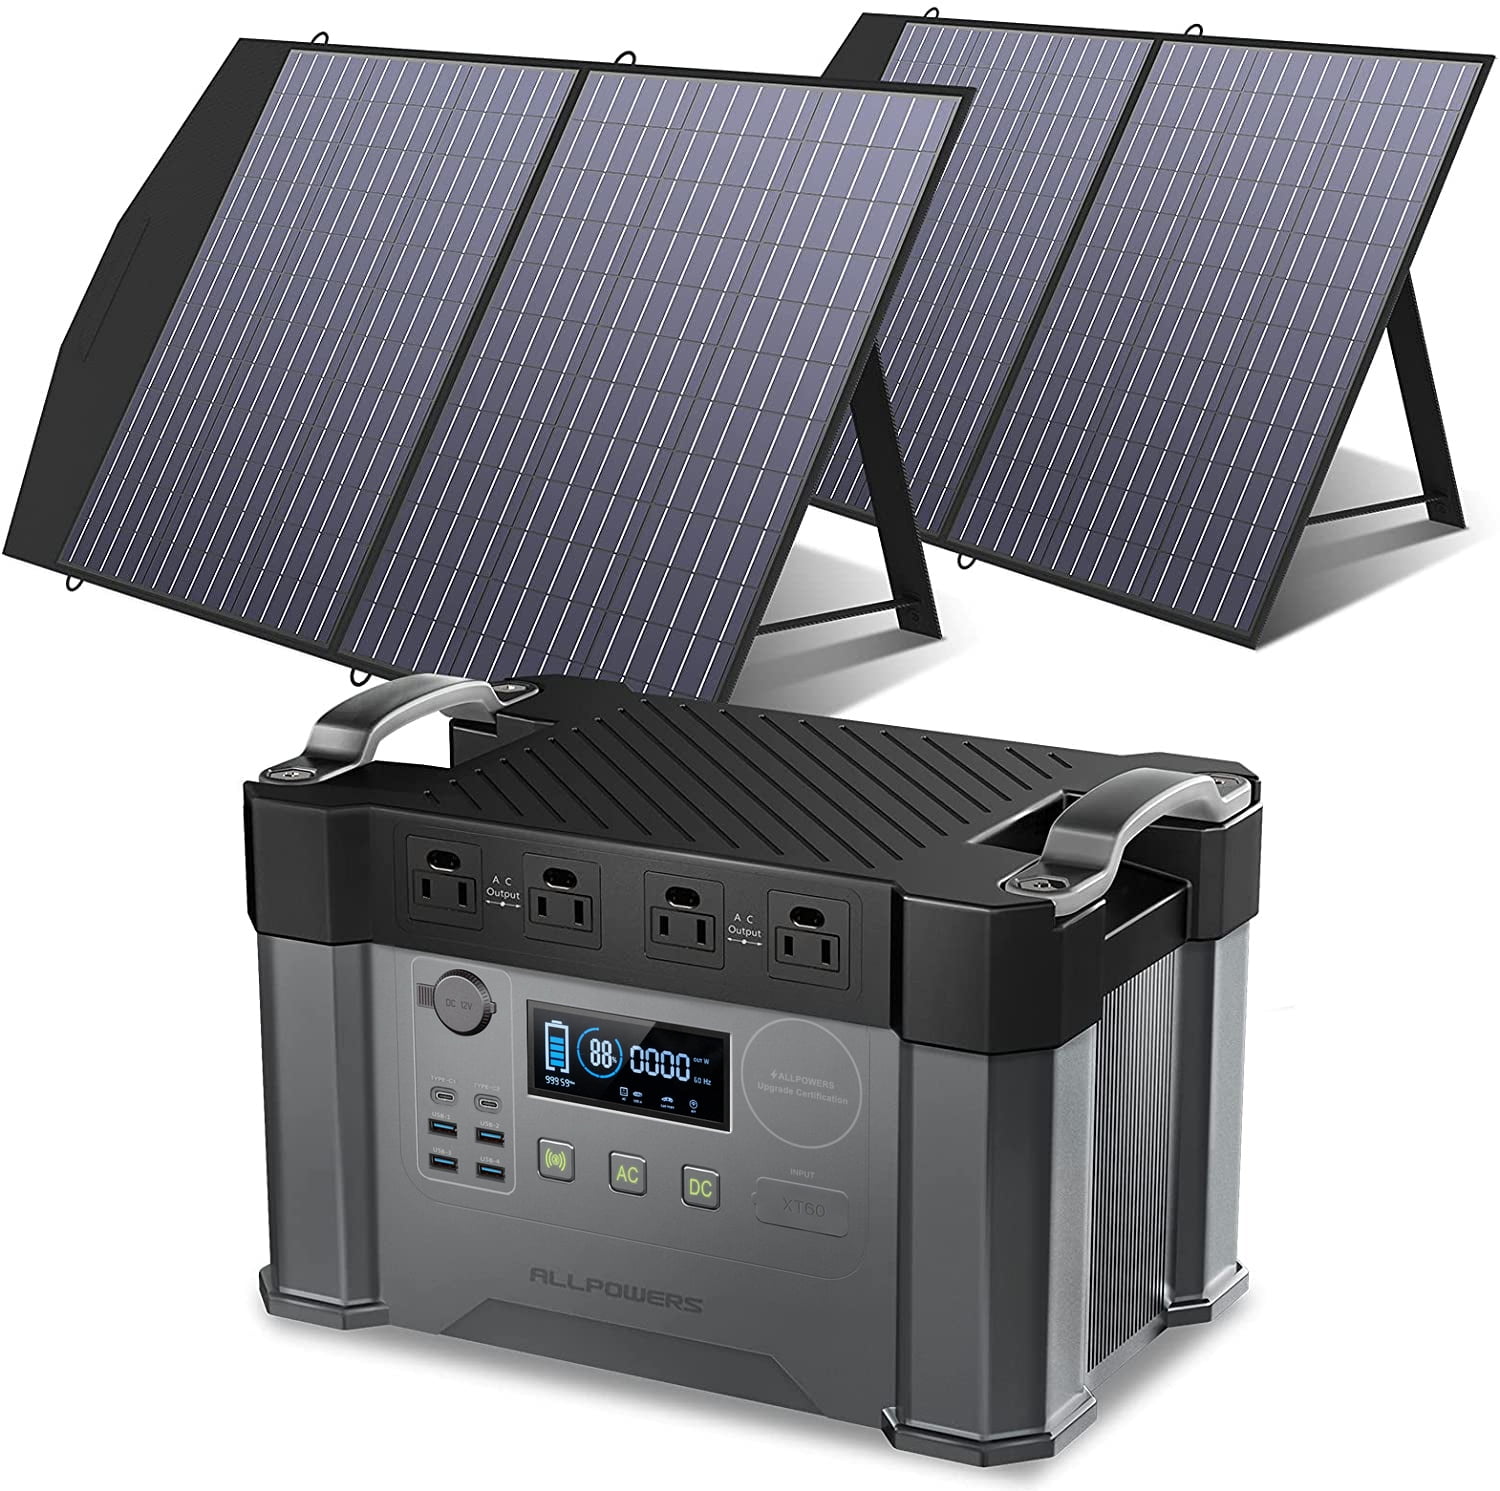 ALLPOWERS S2000 Solar Generator Kit, include 2000W 1500Wh Portable